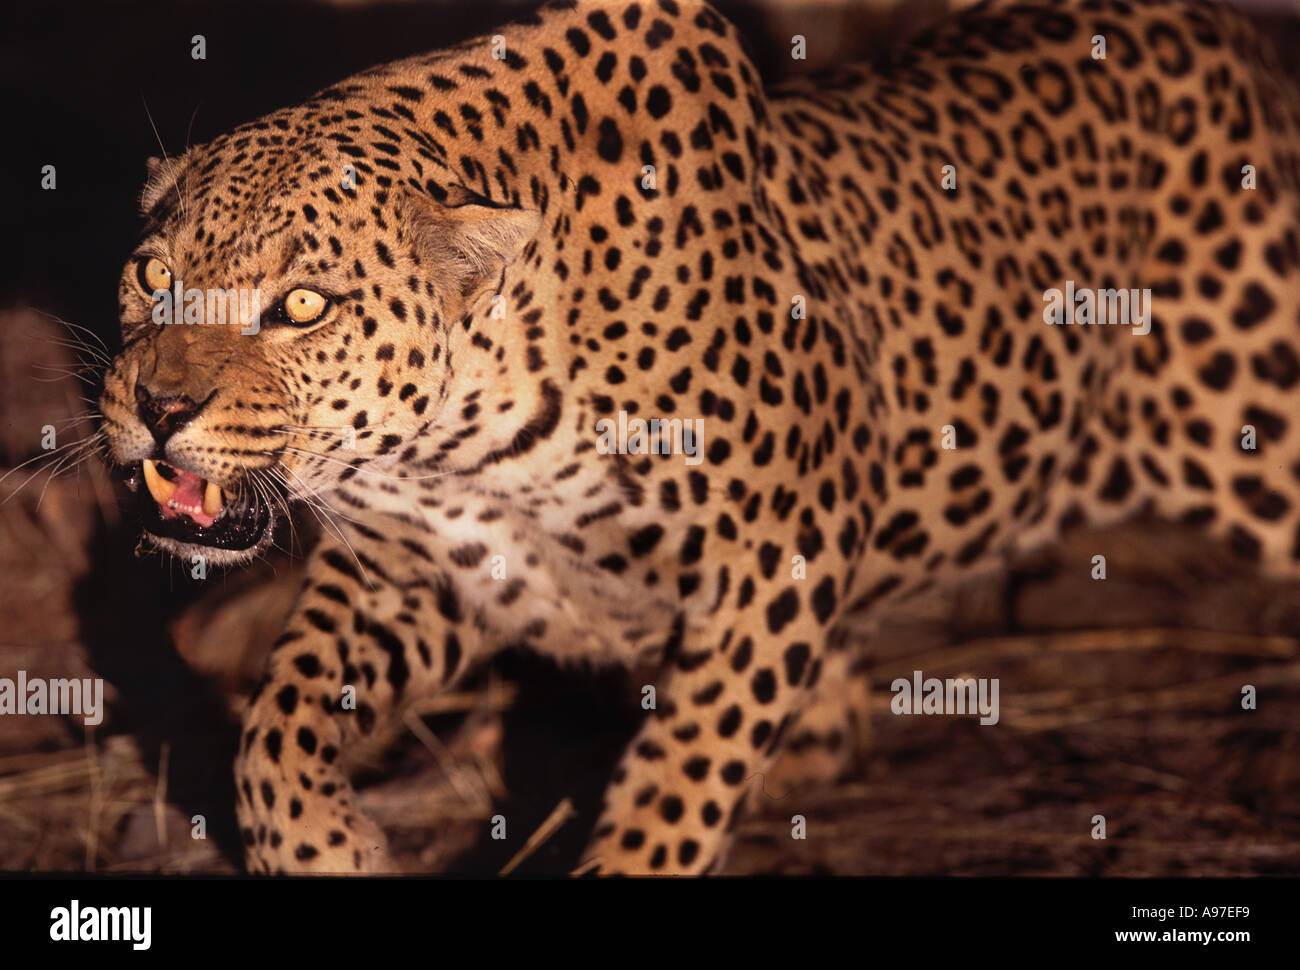 Leopard snarling Namibia Stock Photo